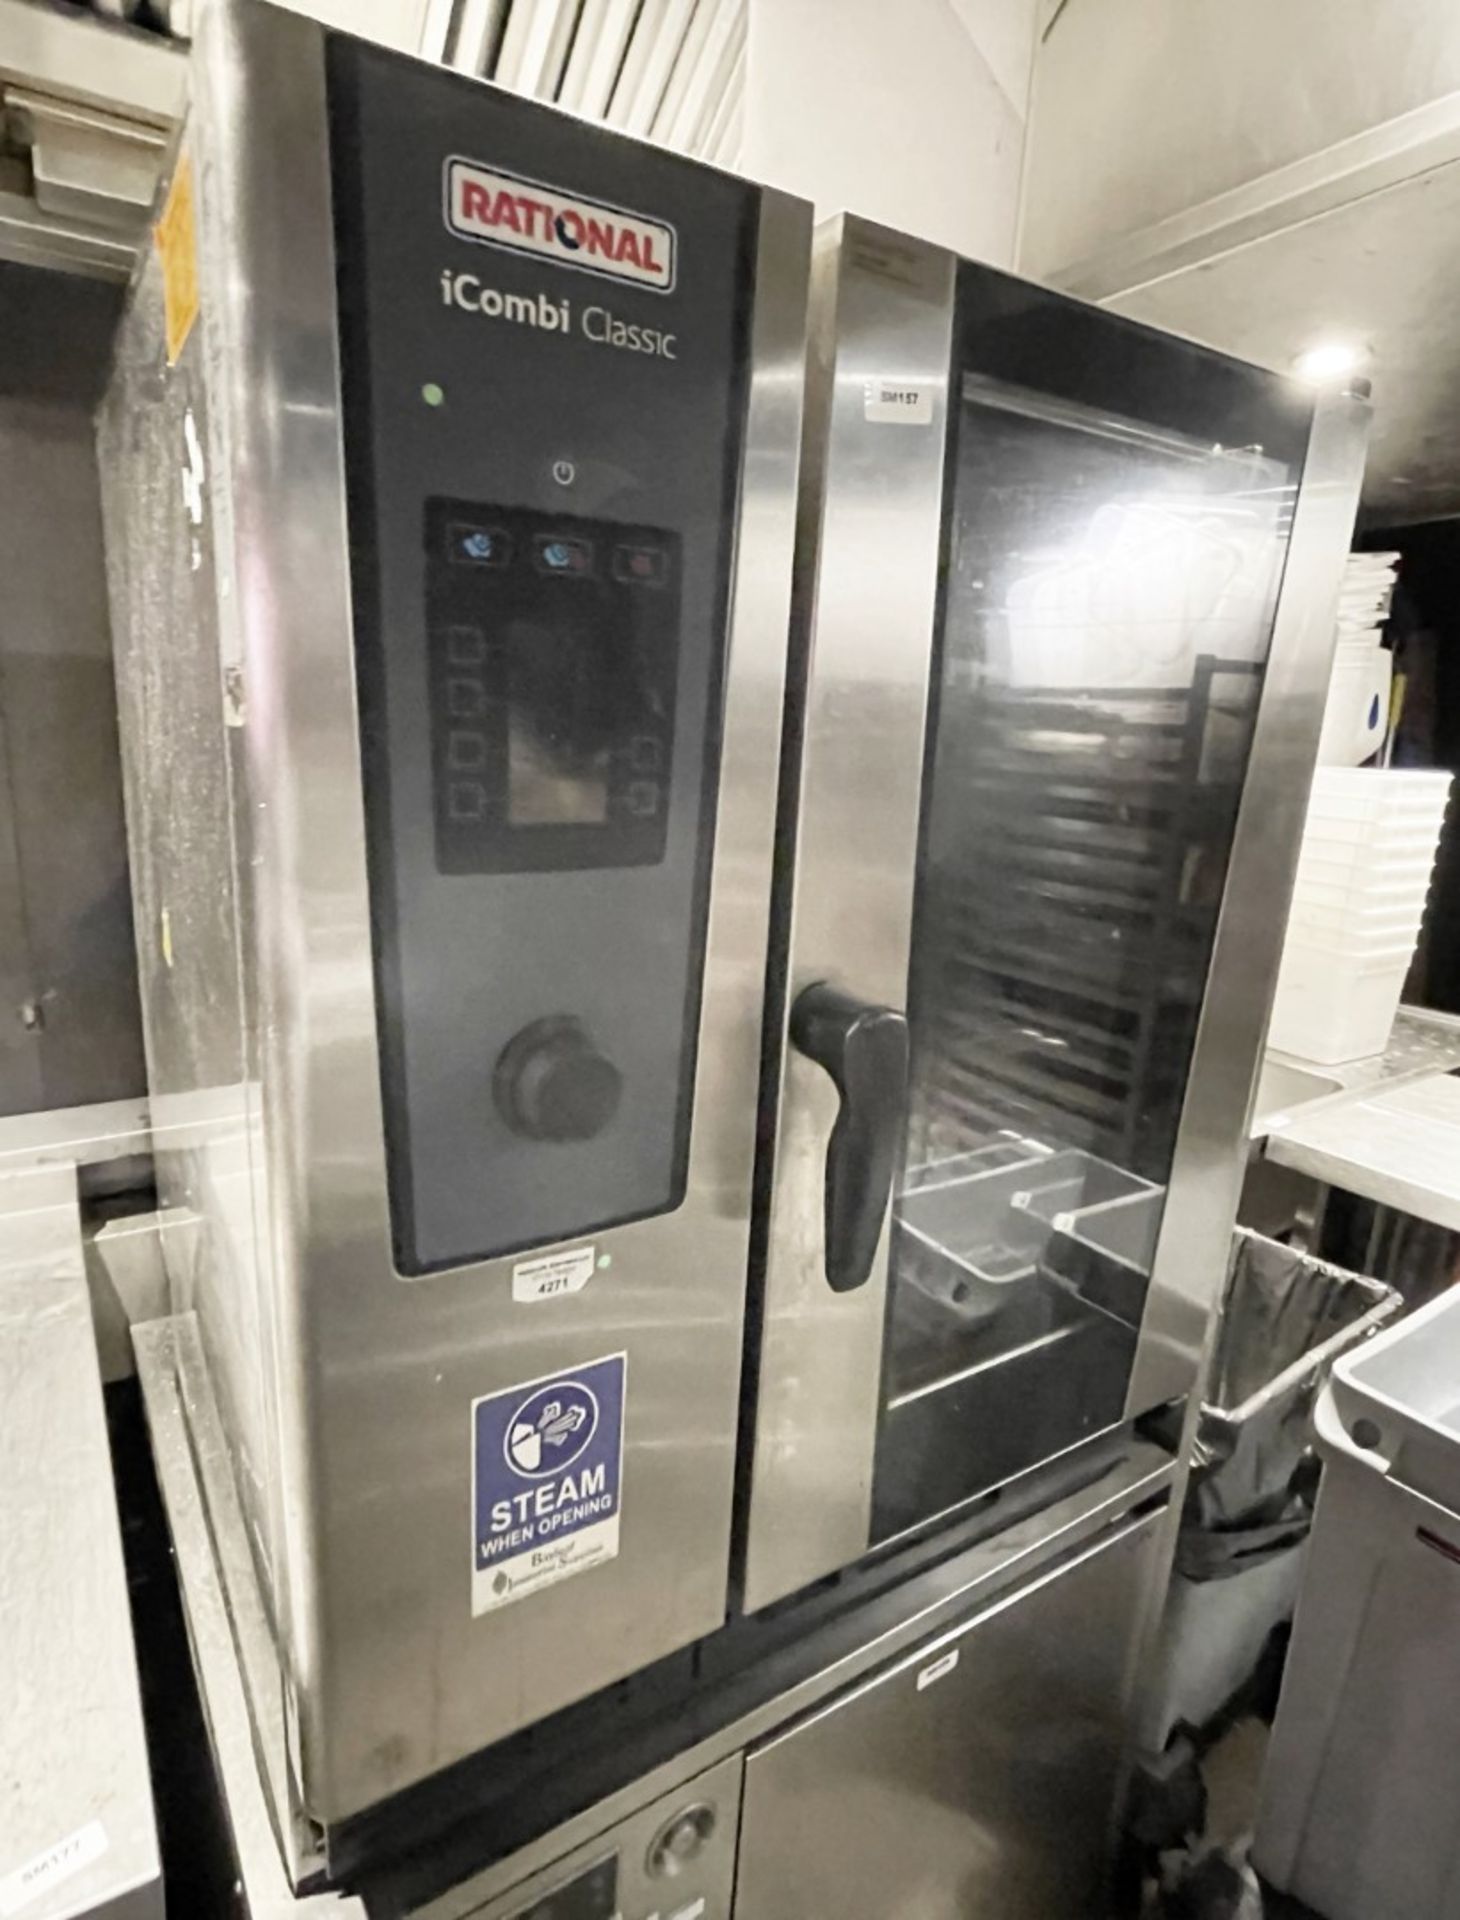 1 x Rational iCombi Classic Electric 3 Phase 10 Grid Combi Oven - Year: 2021 - Model: LM200DE - Image 4 of 18